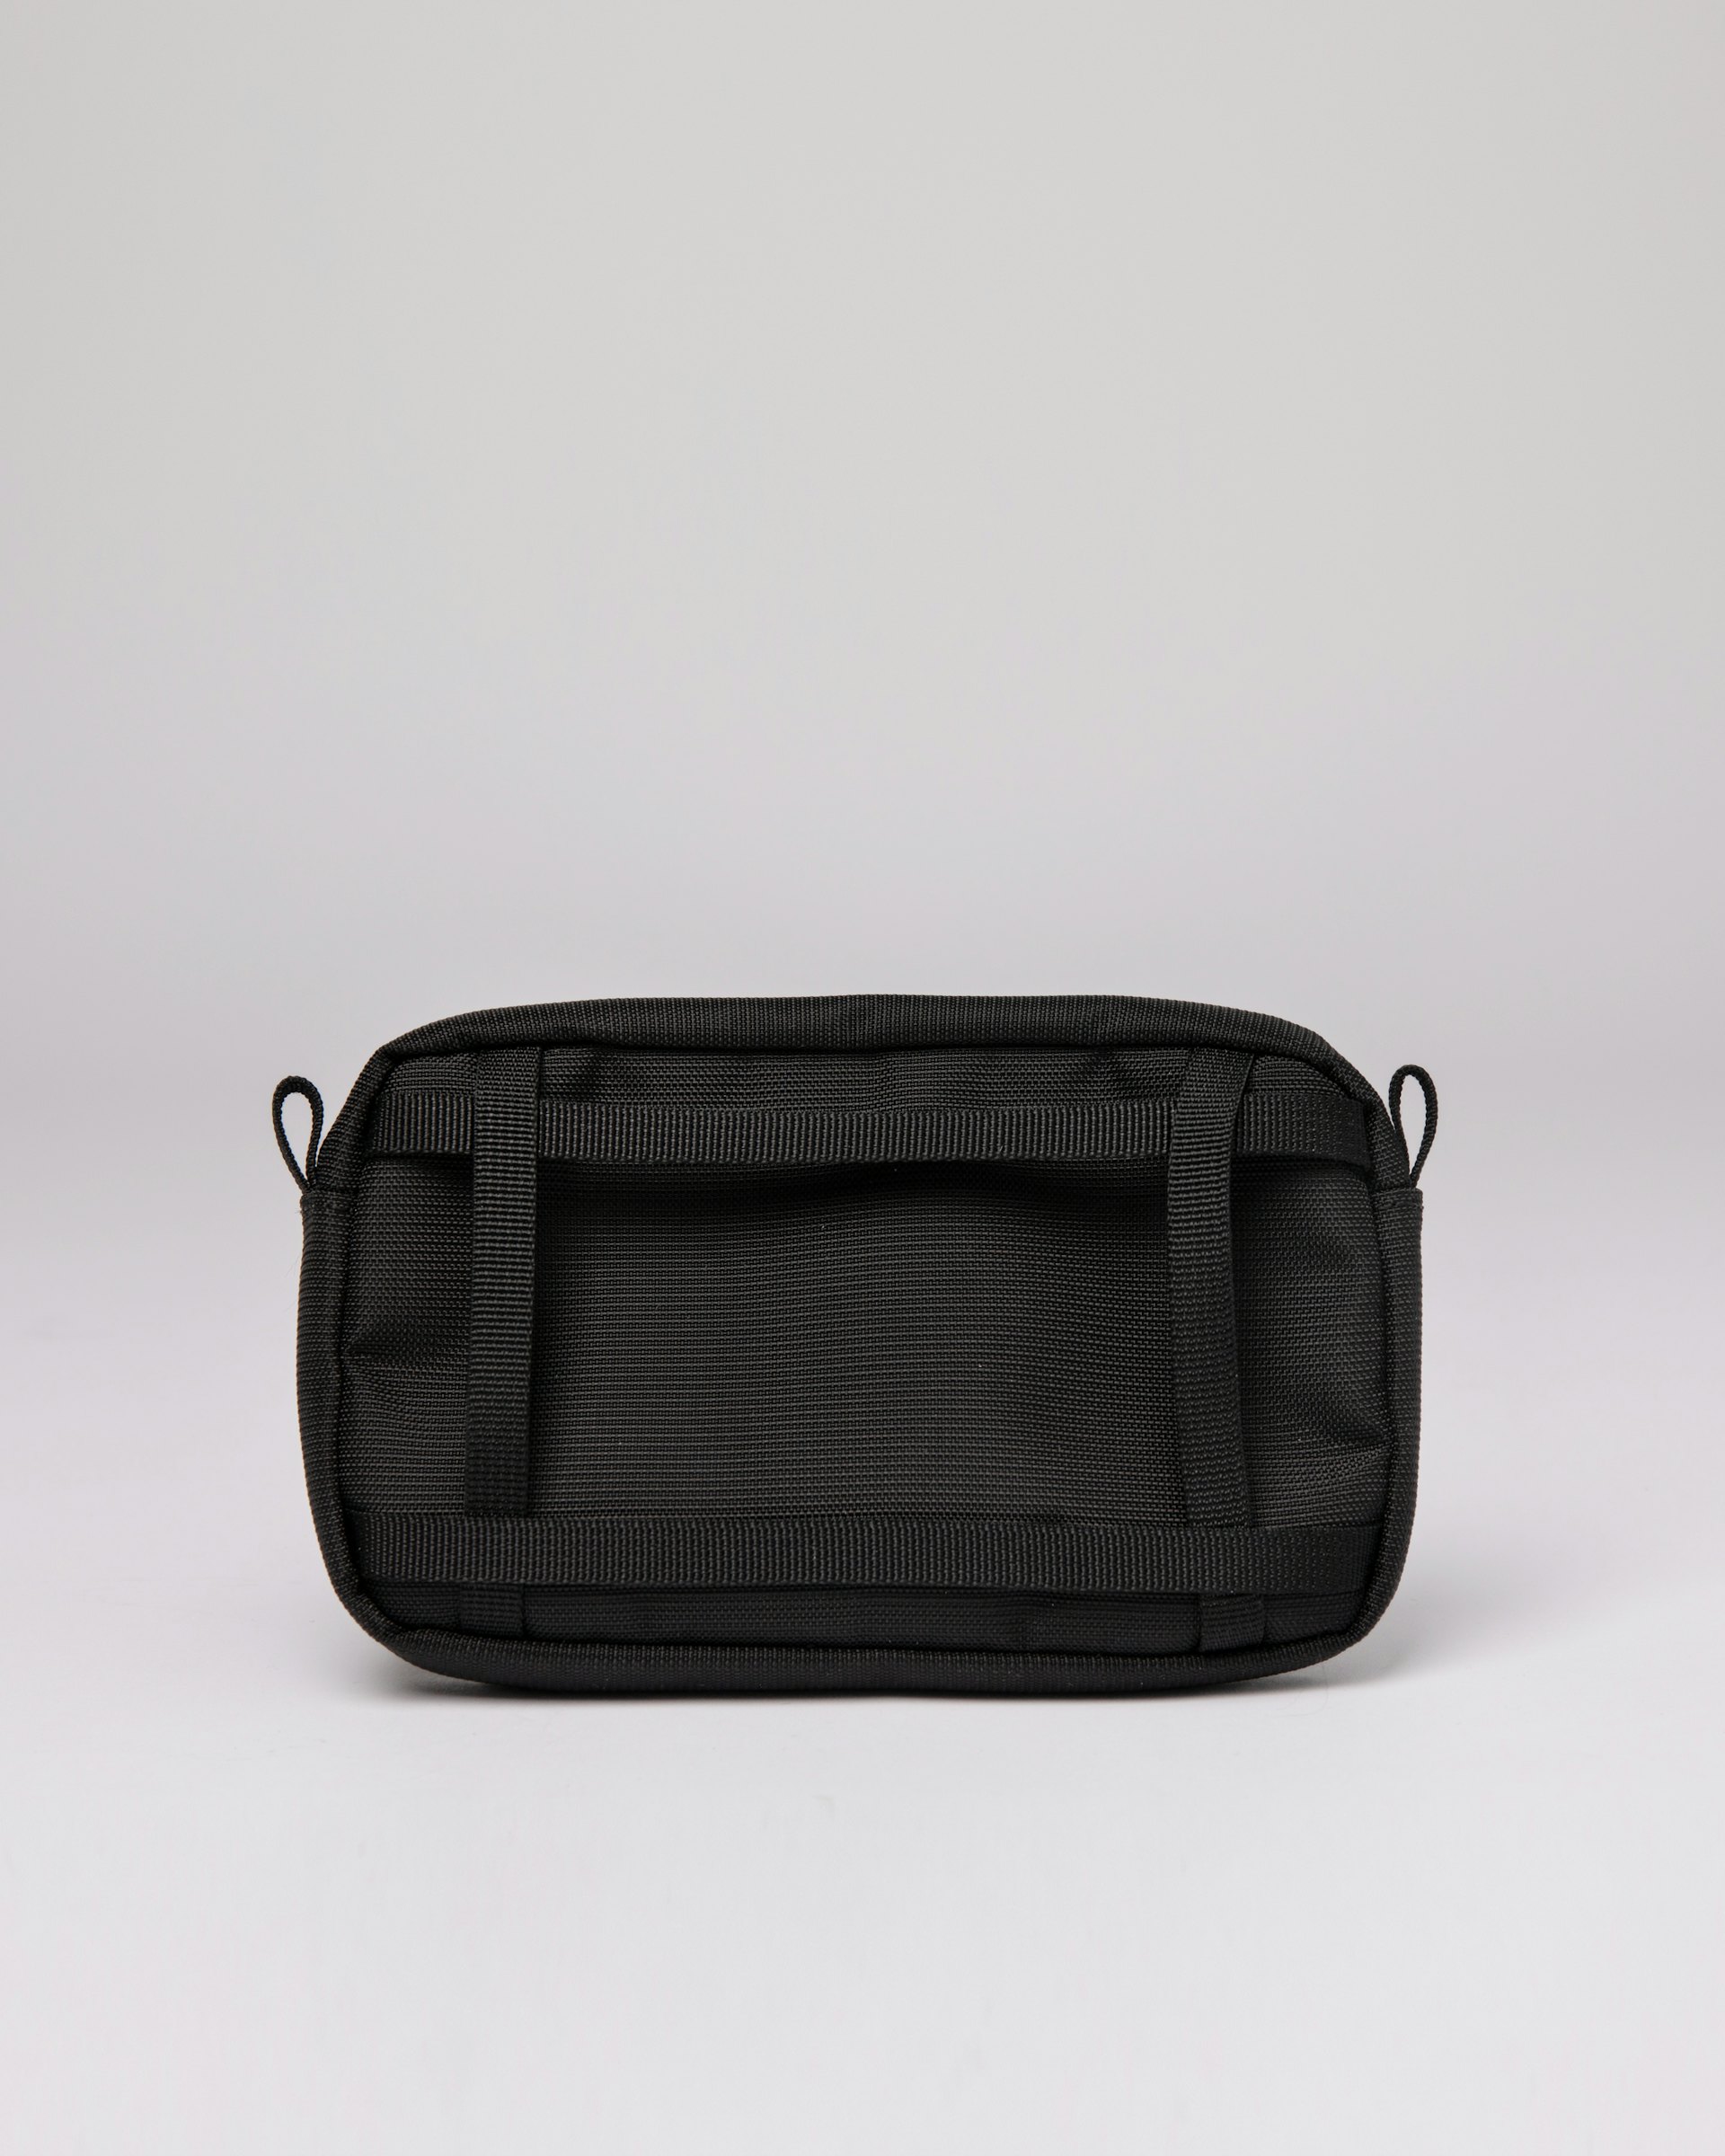 Universal Hip Bag Black belongs to the category Bum bags and is in color black (2 of 3)